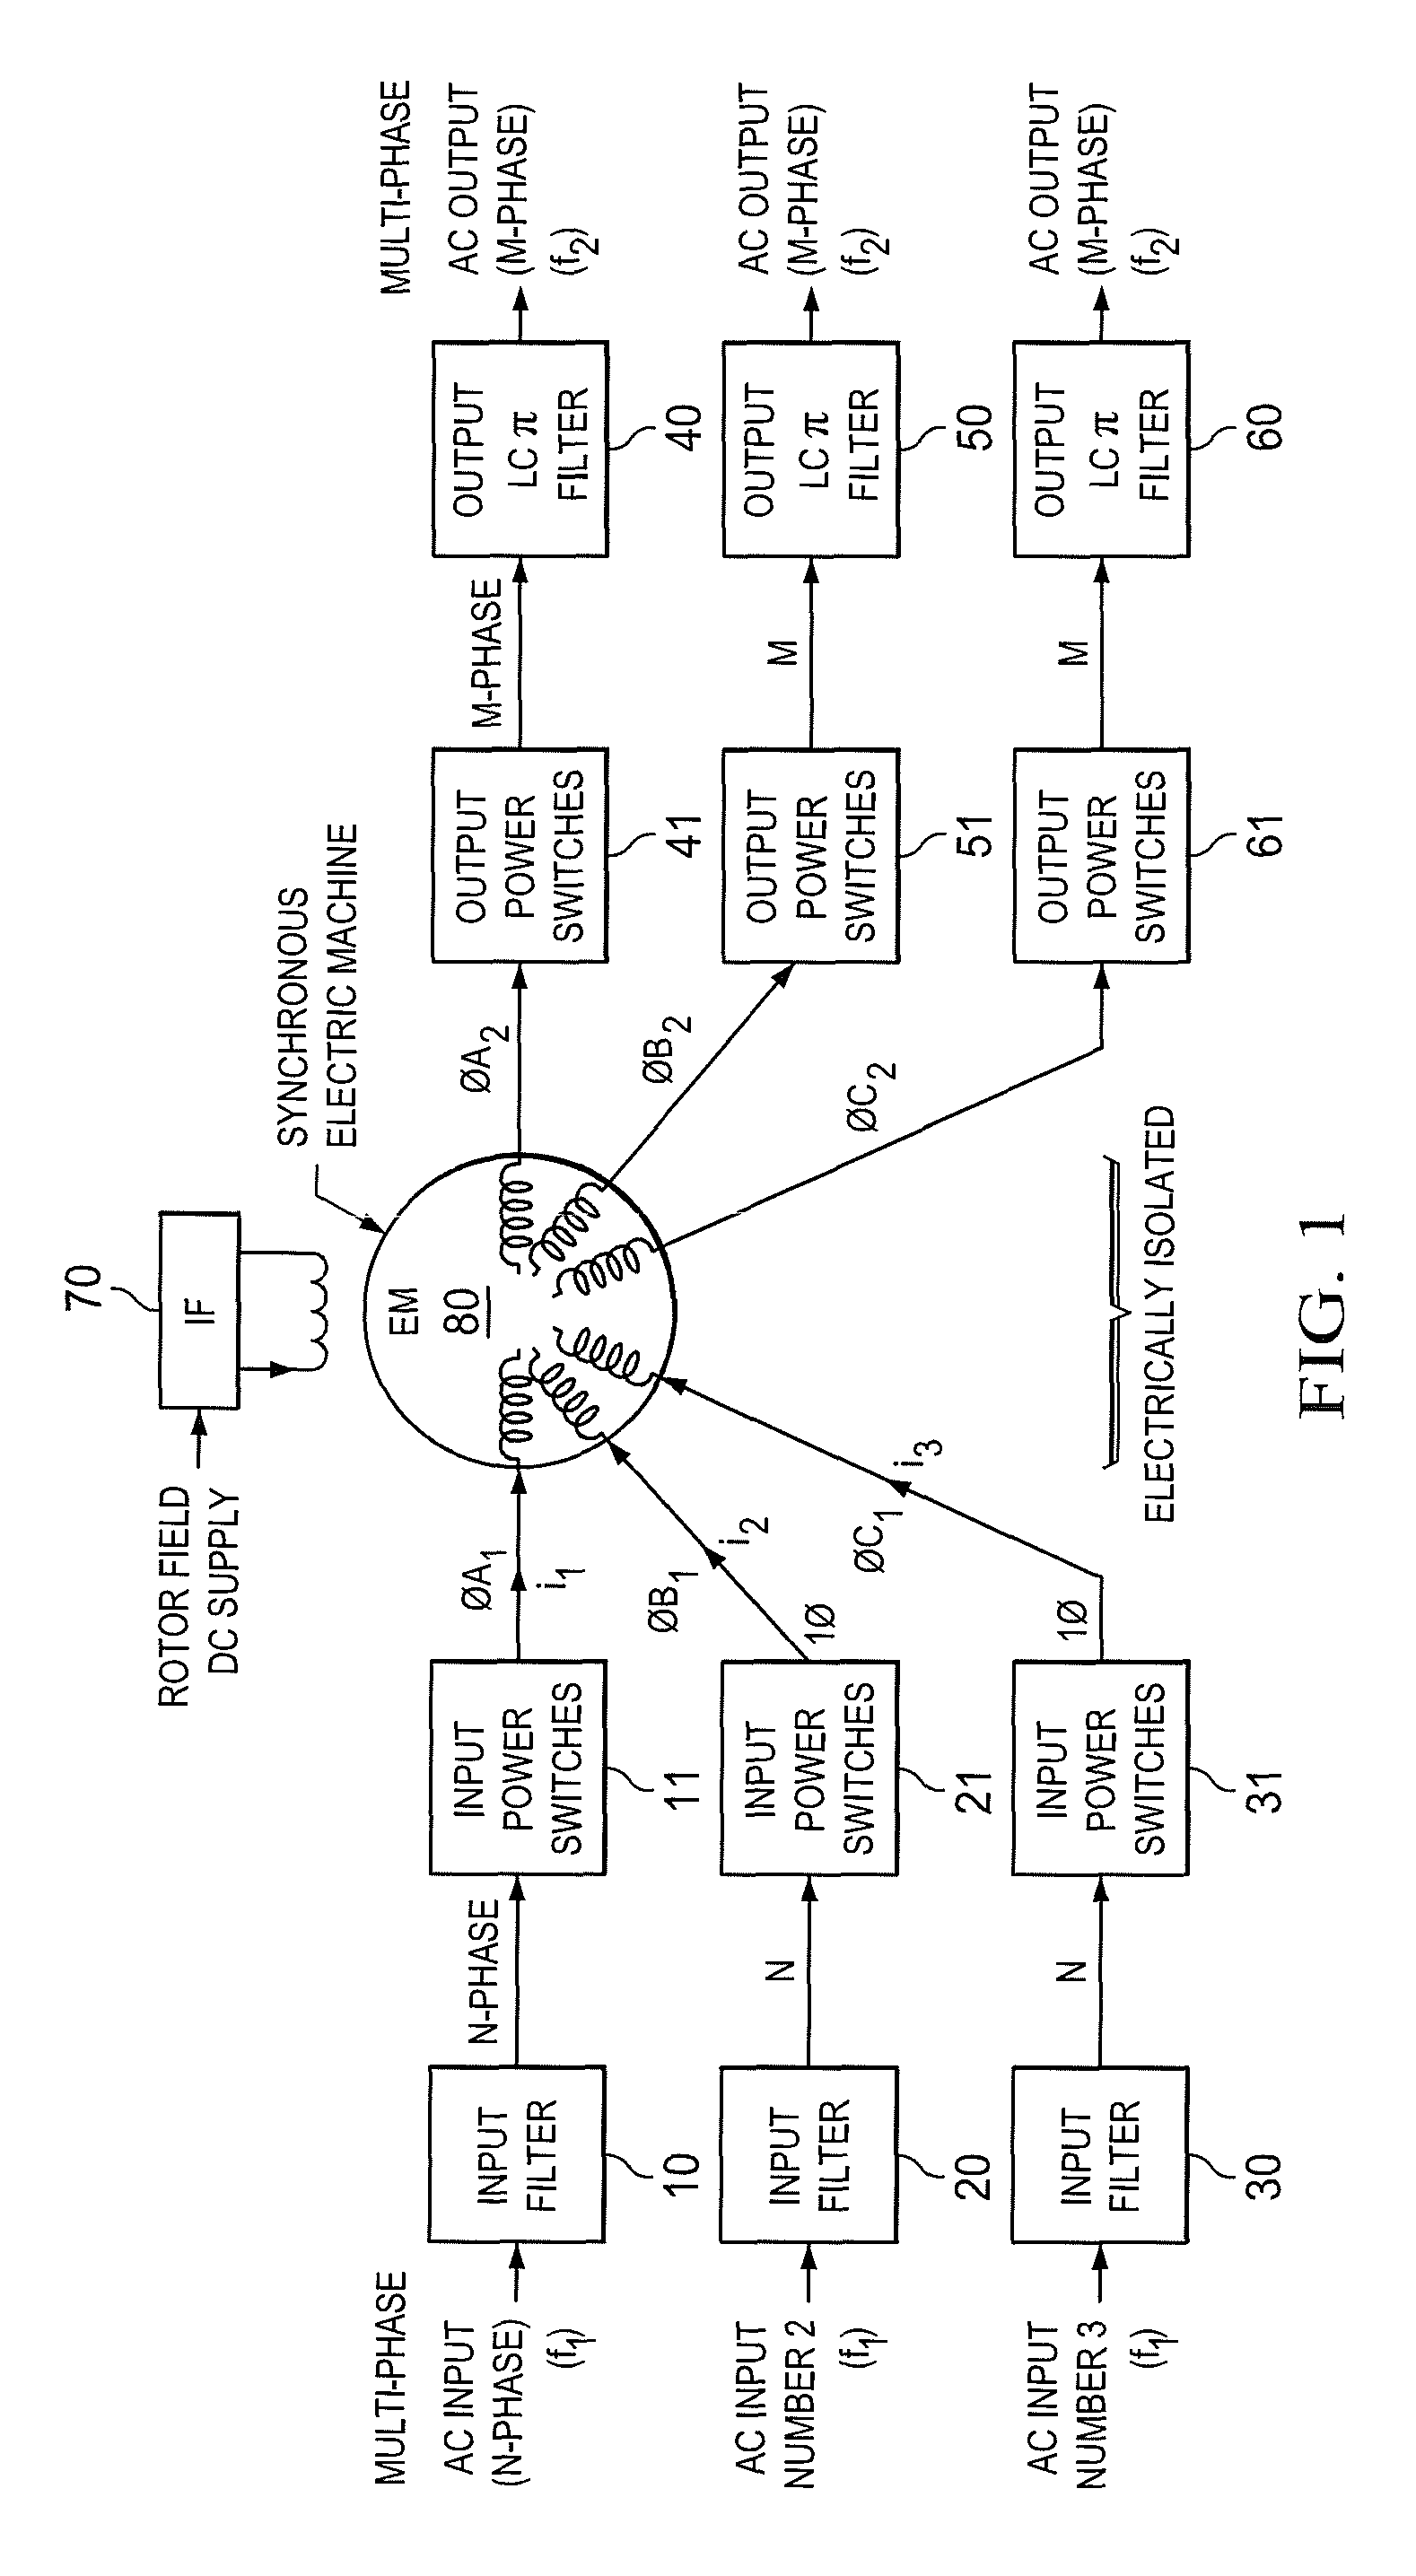 Inertial energy storage system and hydro-fluoro-ether power transformer scheme for radar power systems and large PFN charging